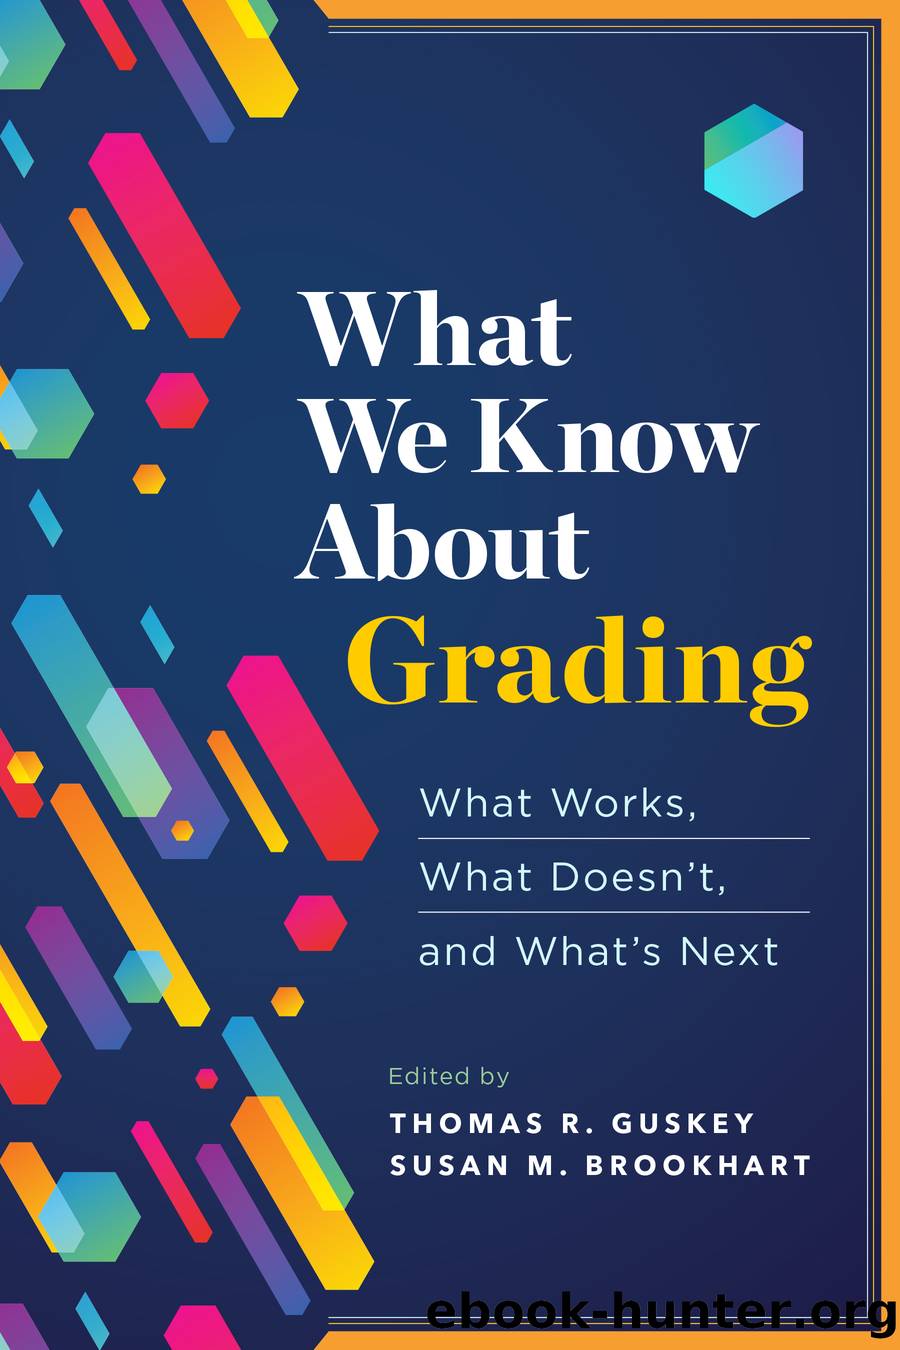 What We Know About Grading by Thomas R. Guskey